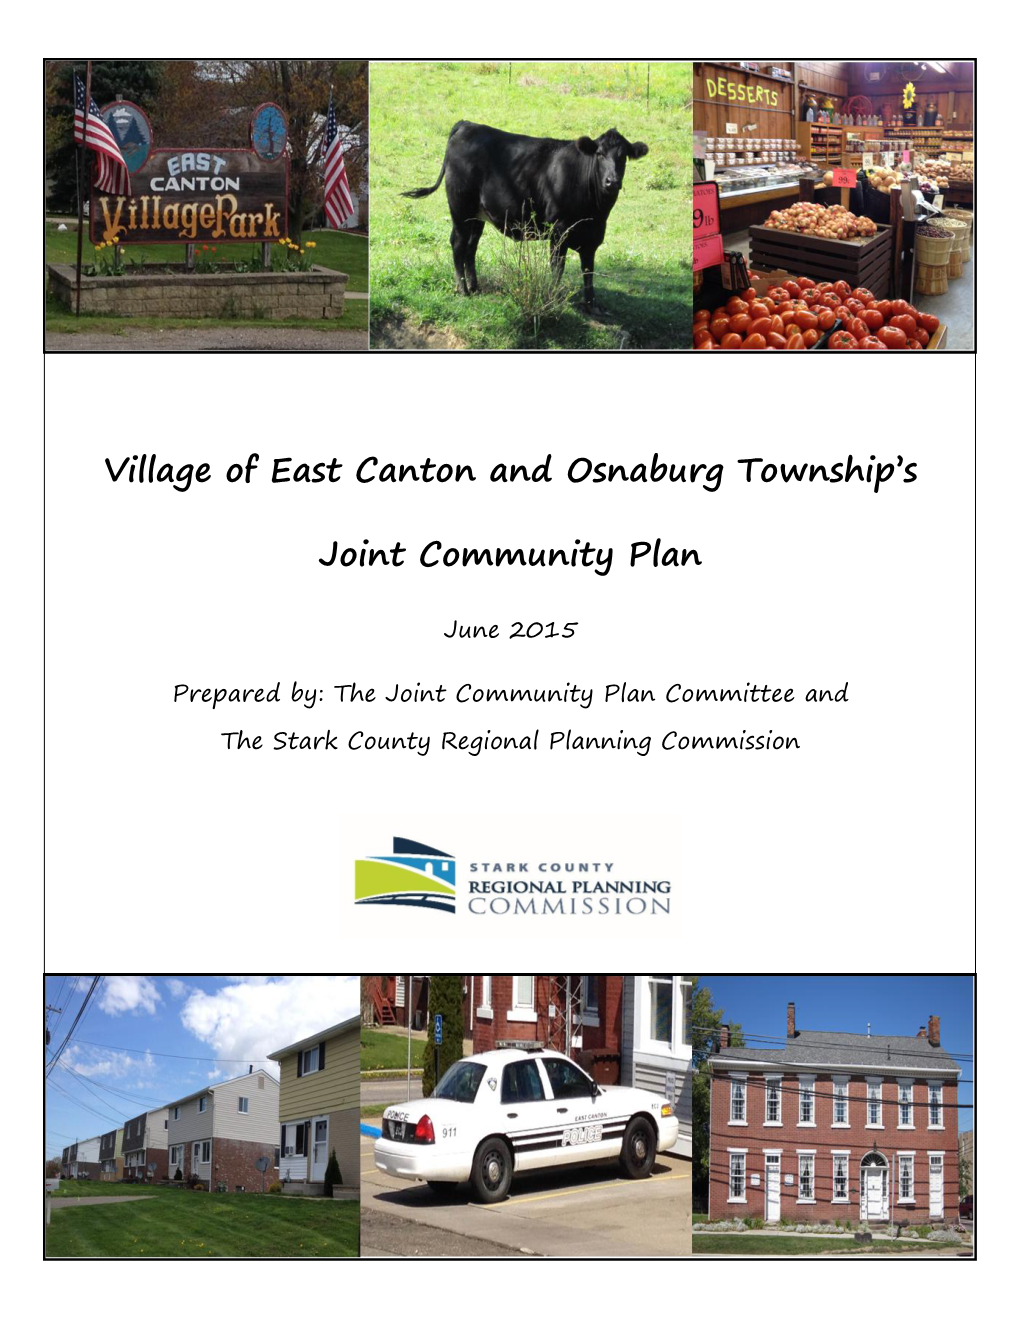 Village of East Canton and Osnaburg Township's Joint Community Plan